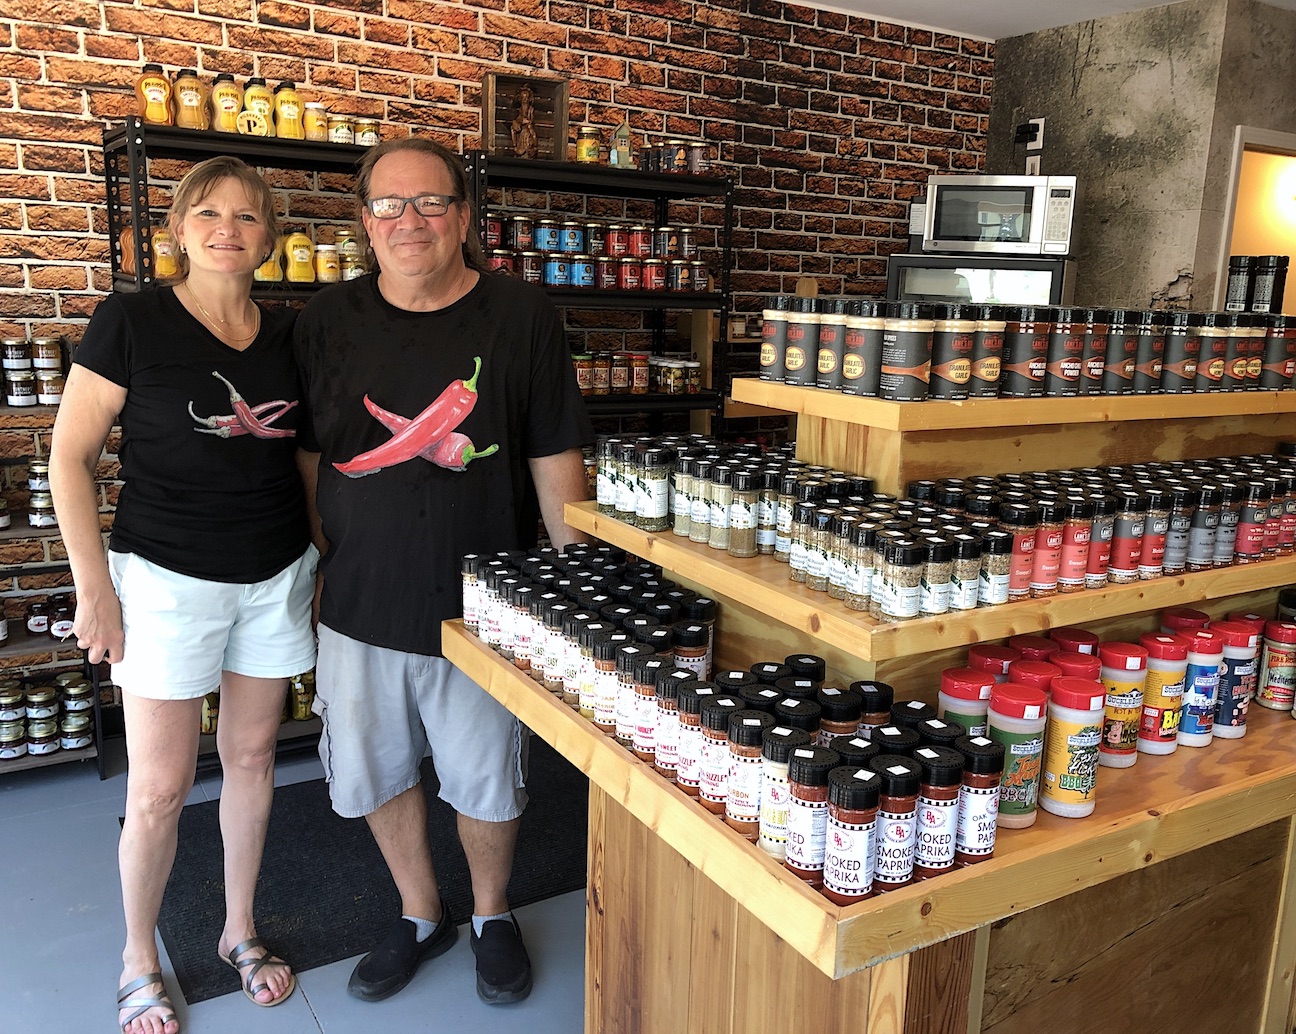 Donna and Neil Garfinkel of Sgt. Peppers Hot Sauces, Etc.